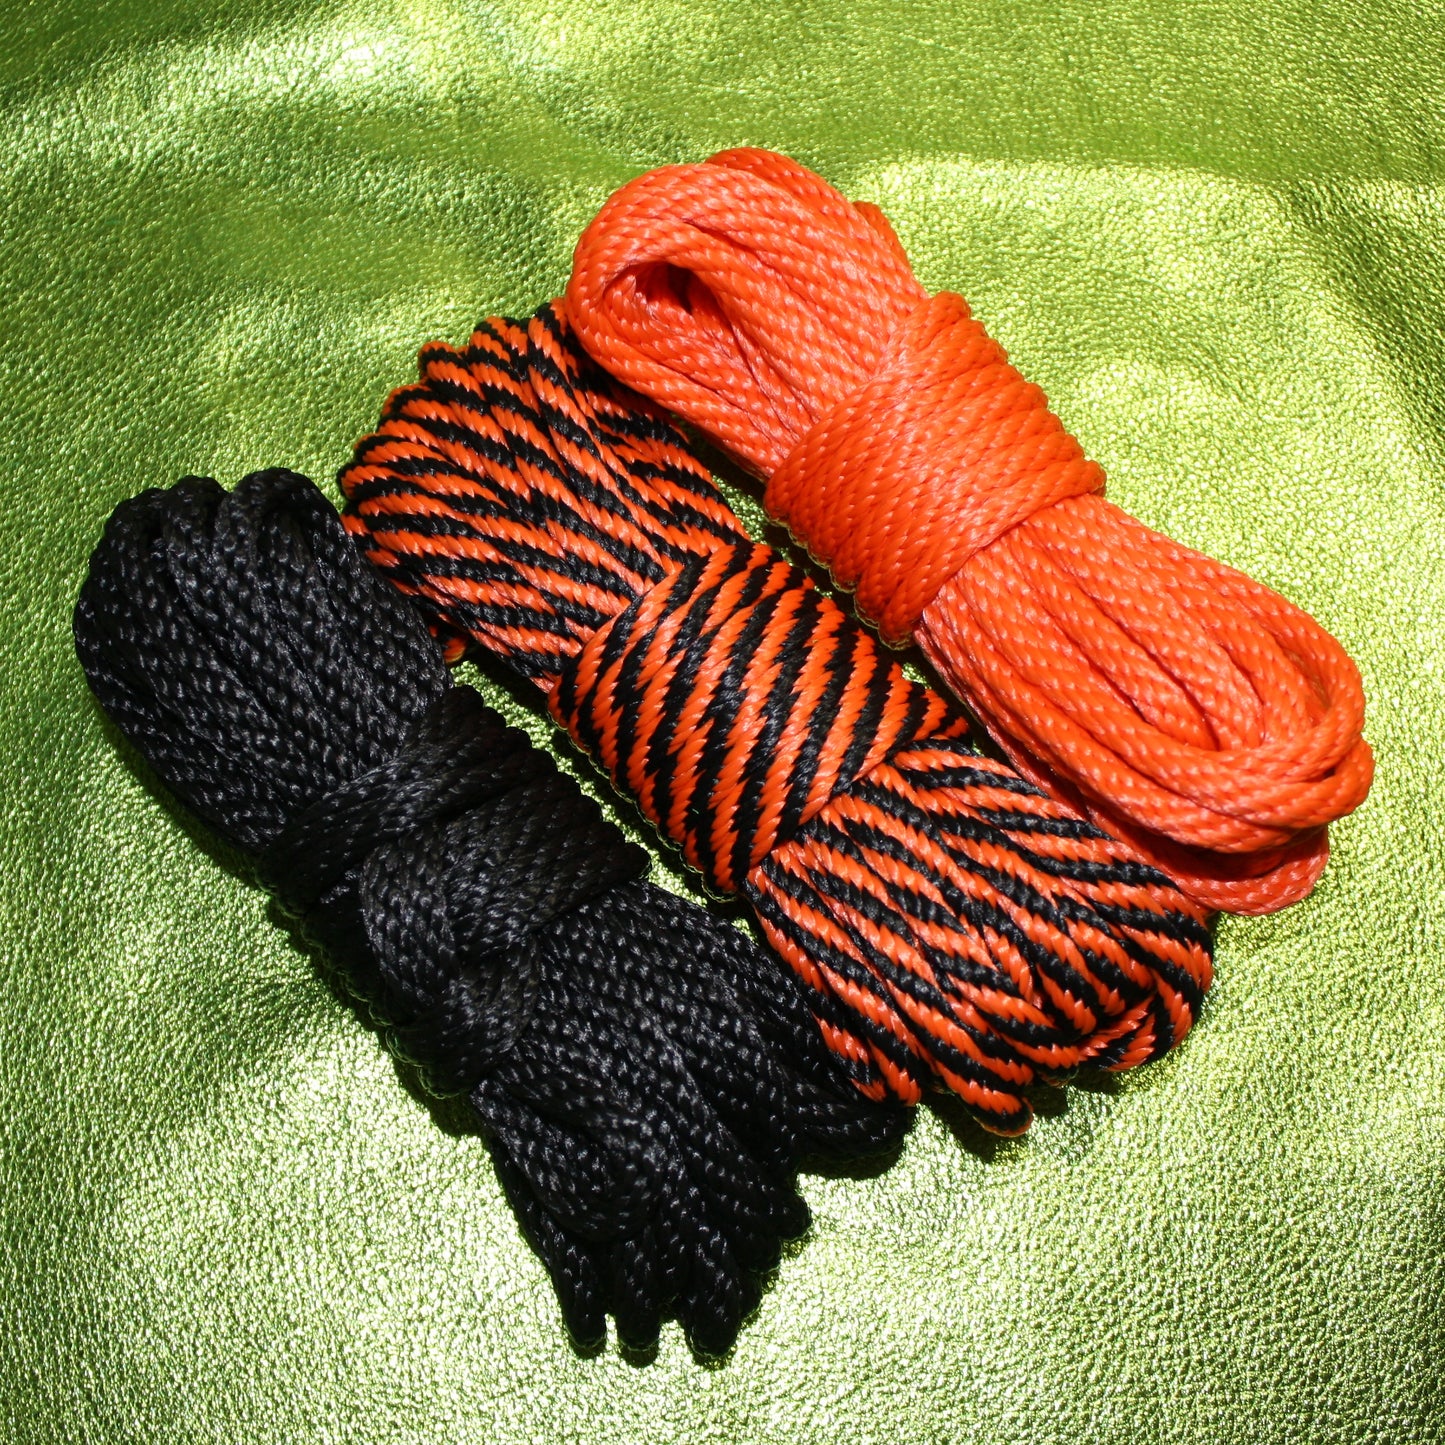 Halloween Spooky Rope! Black and Orange! Available all year!